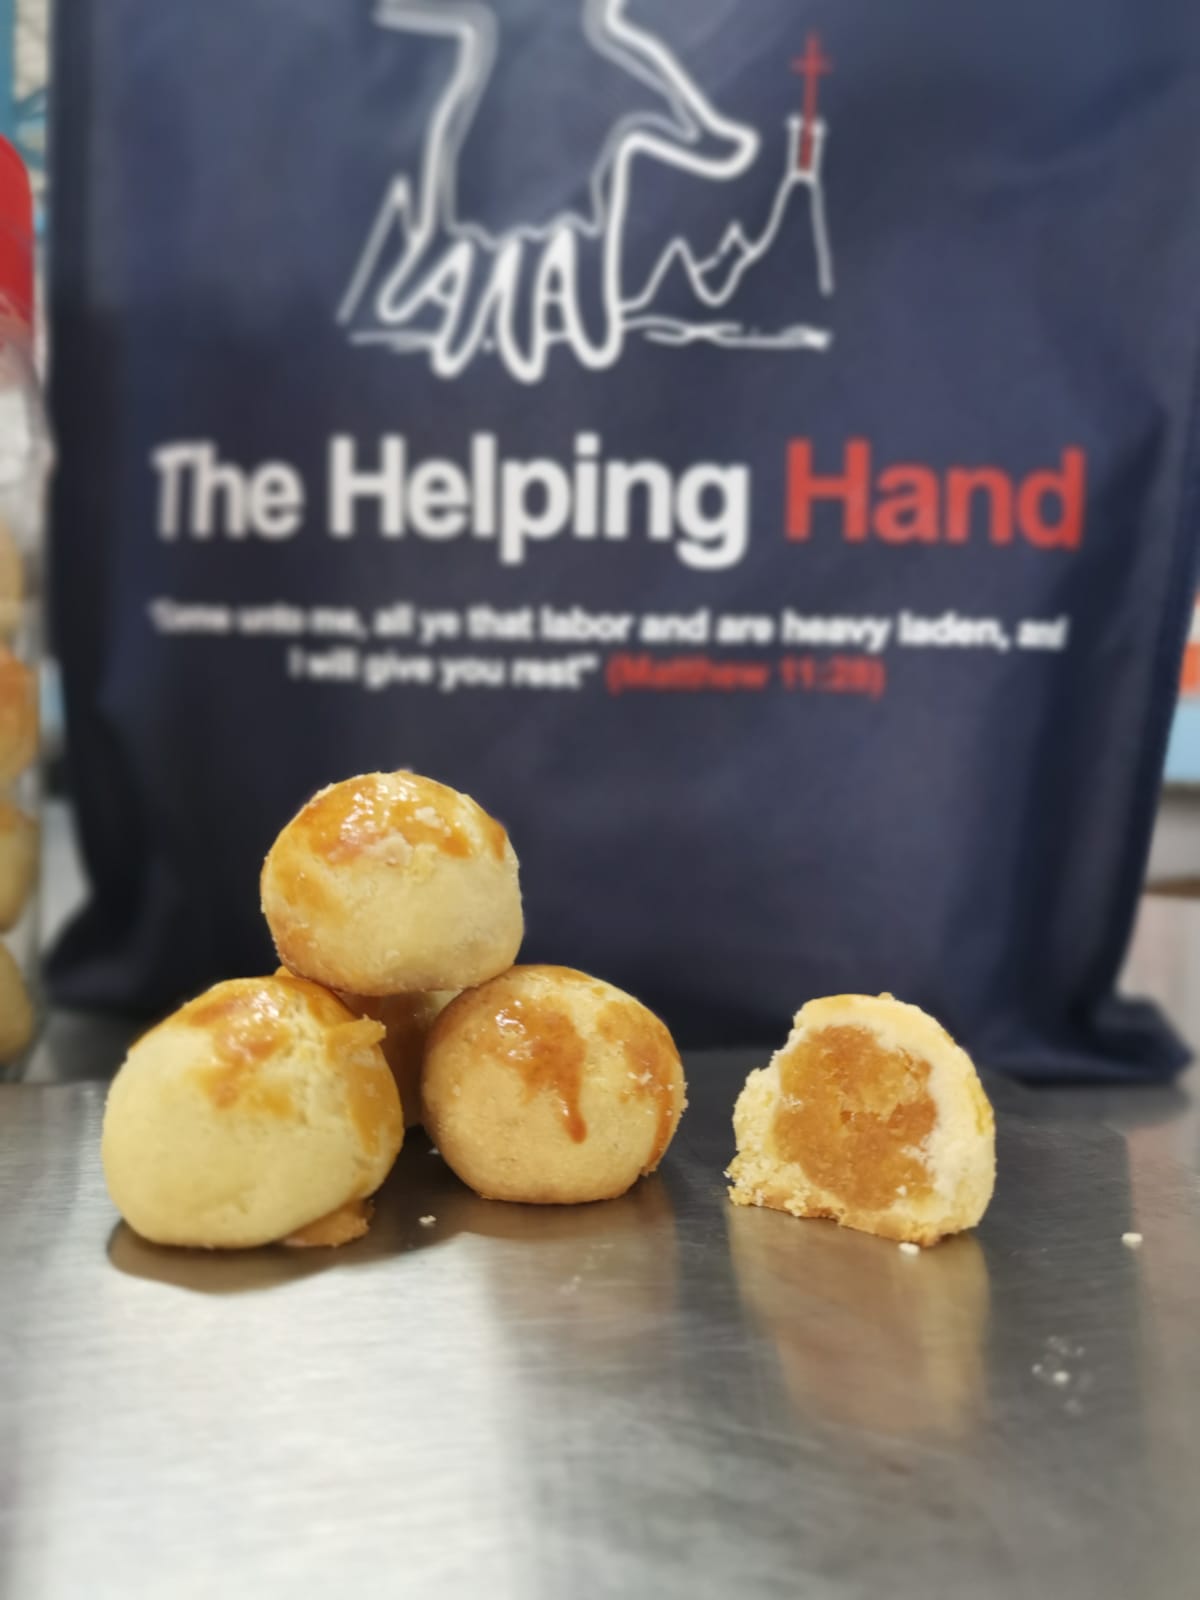 Baked by residents of The Helping Hand, proceeds from the pineapple tarts will go to funding the work of the organisation to rehabilitate drug addicts. 